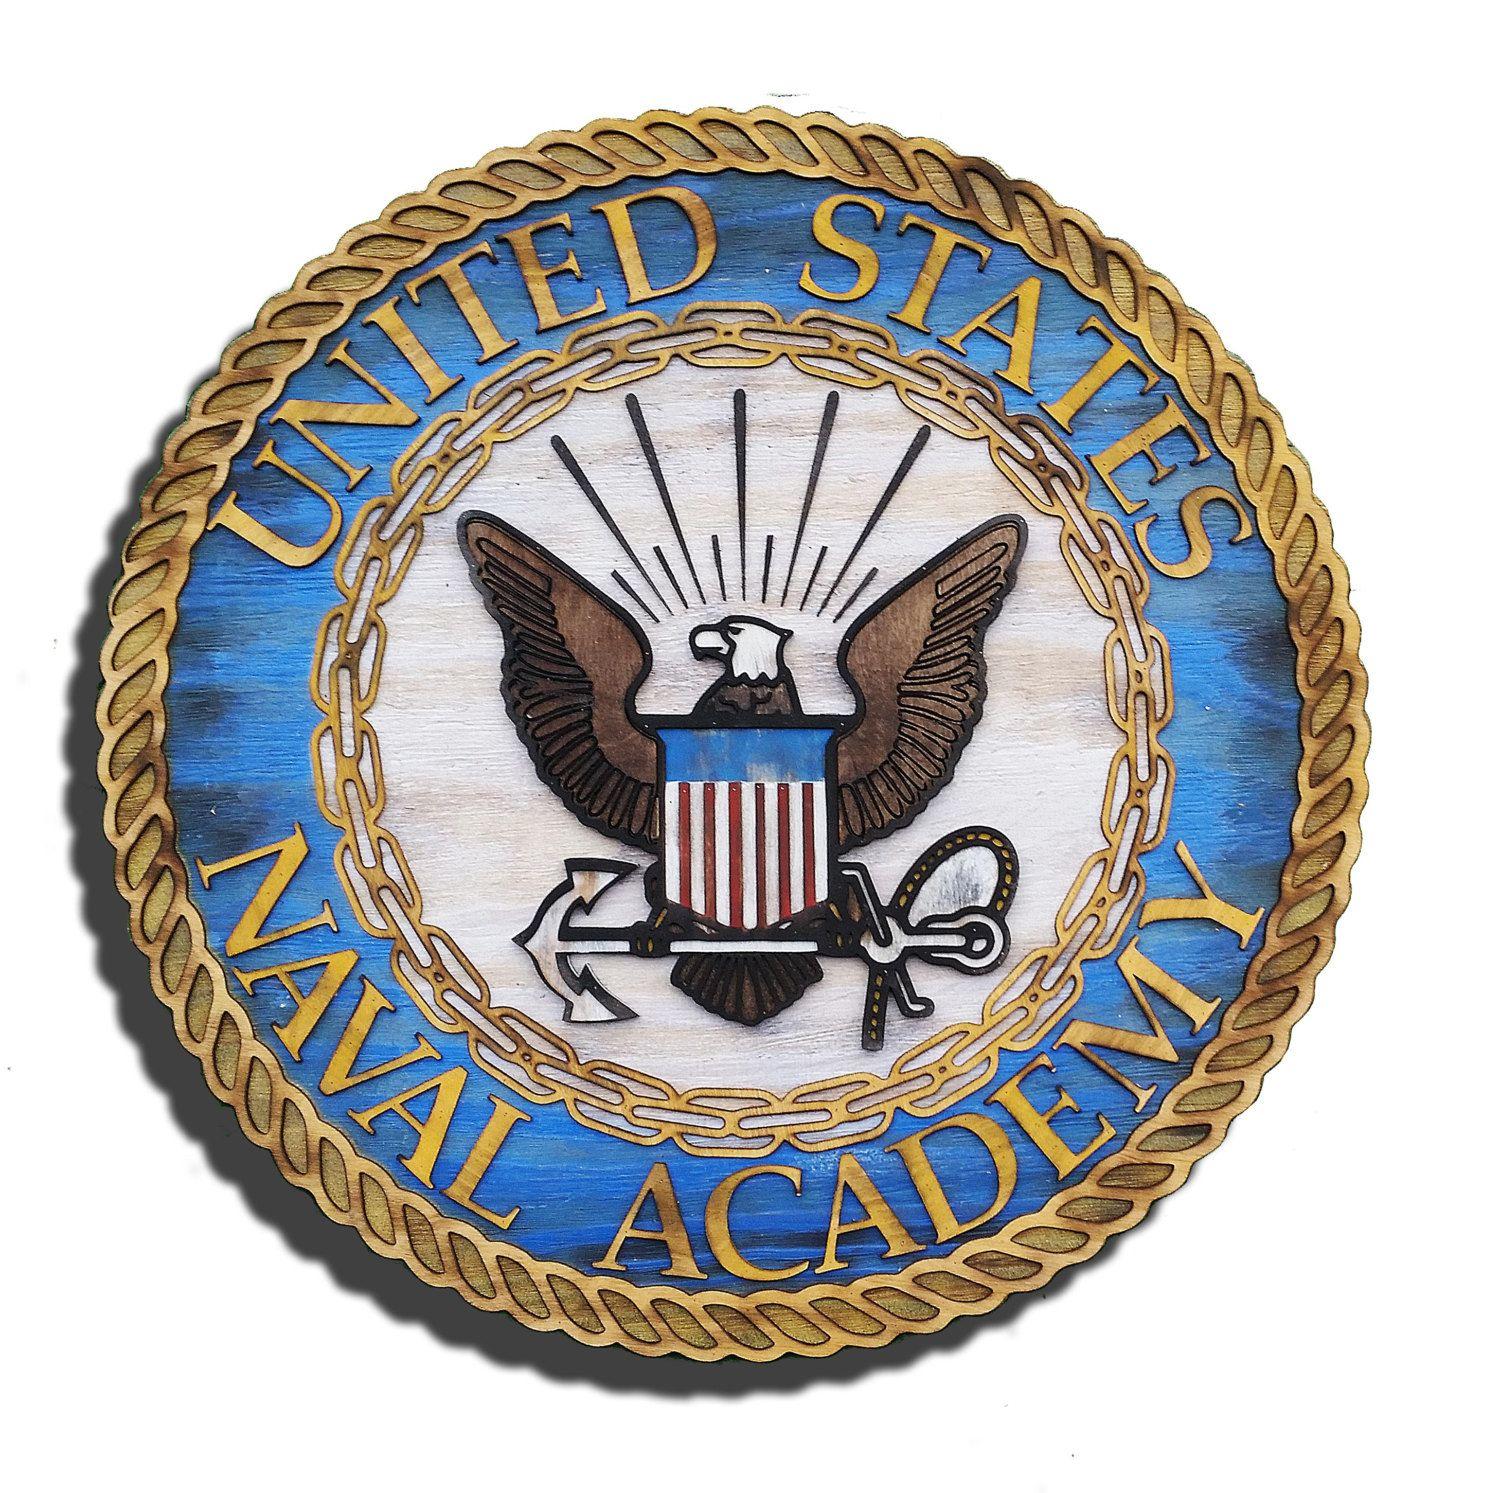 United States Naval Academy Logo - United States Naval Academy with 3D from reclaimed wood, vintage ...